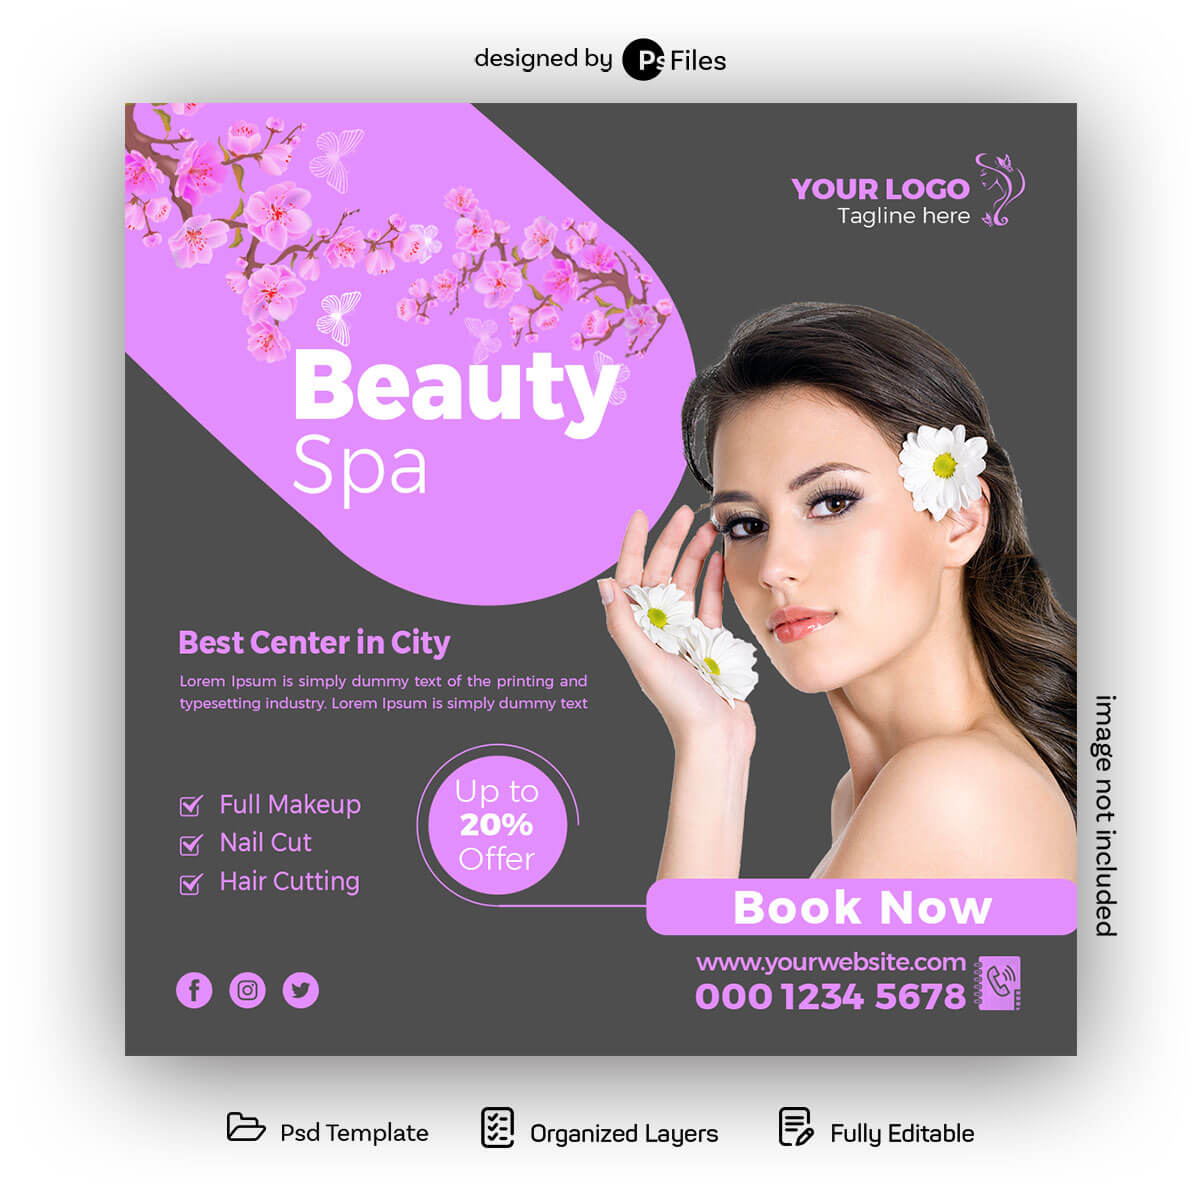 Pink color PsFiles Free Beauty Spa Salon Instagram Post Design PSD Template